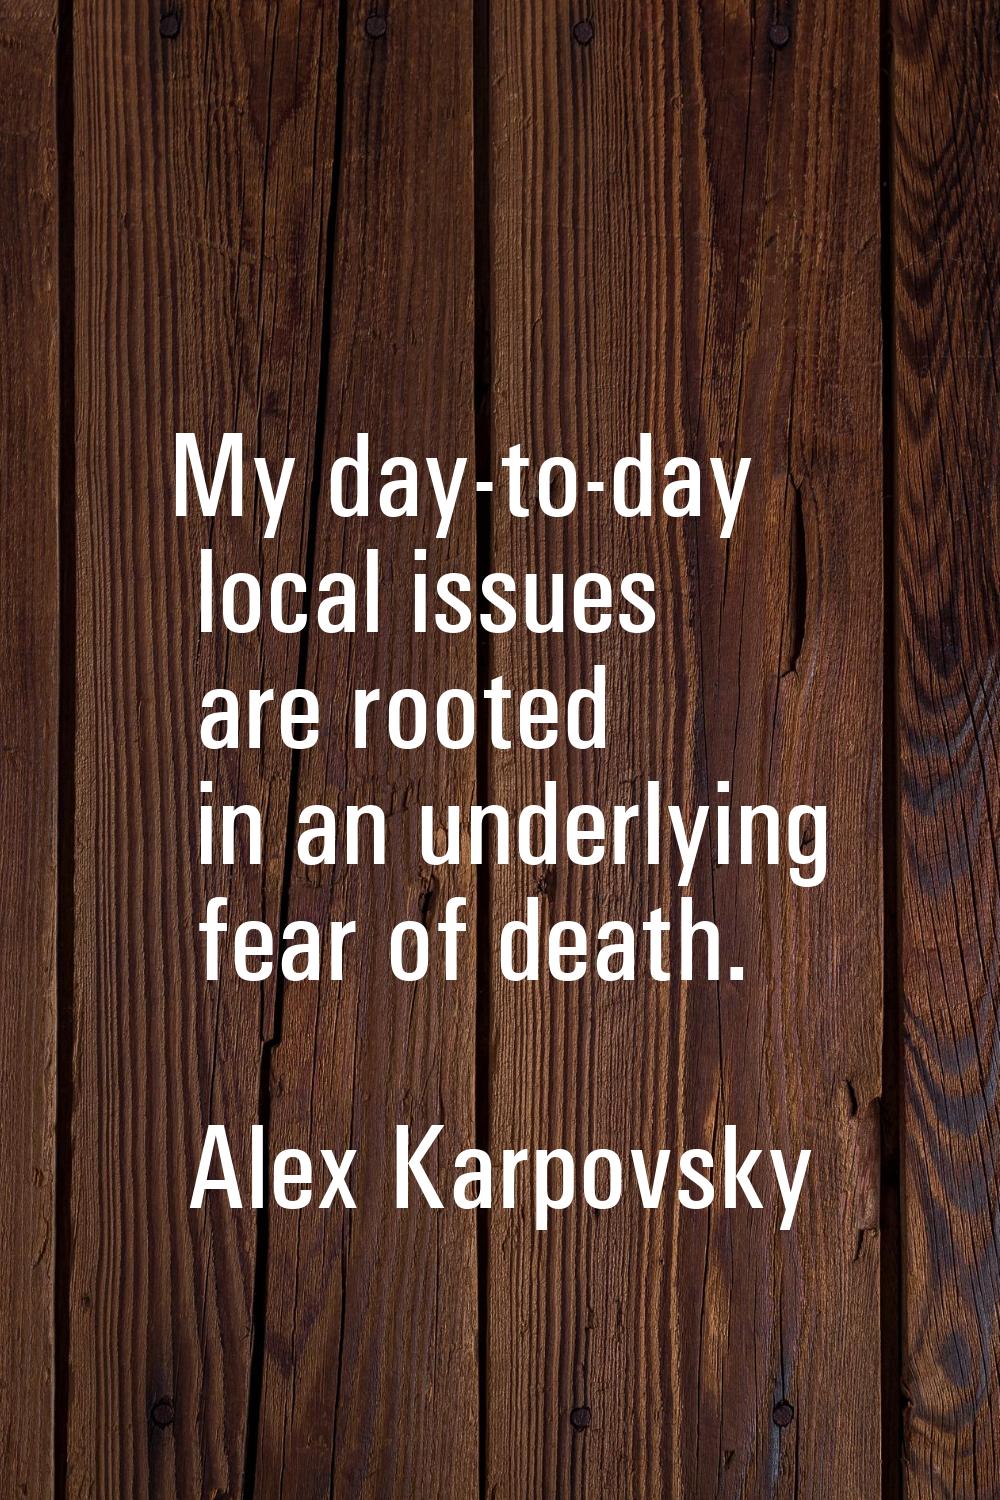 My day-to-day local issues are rooted in an underlying fear of death.